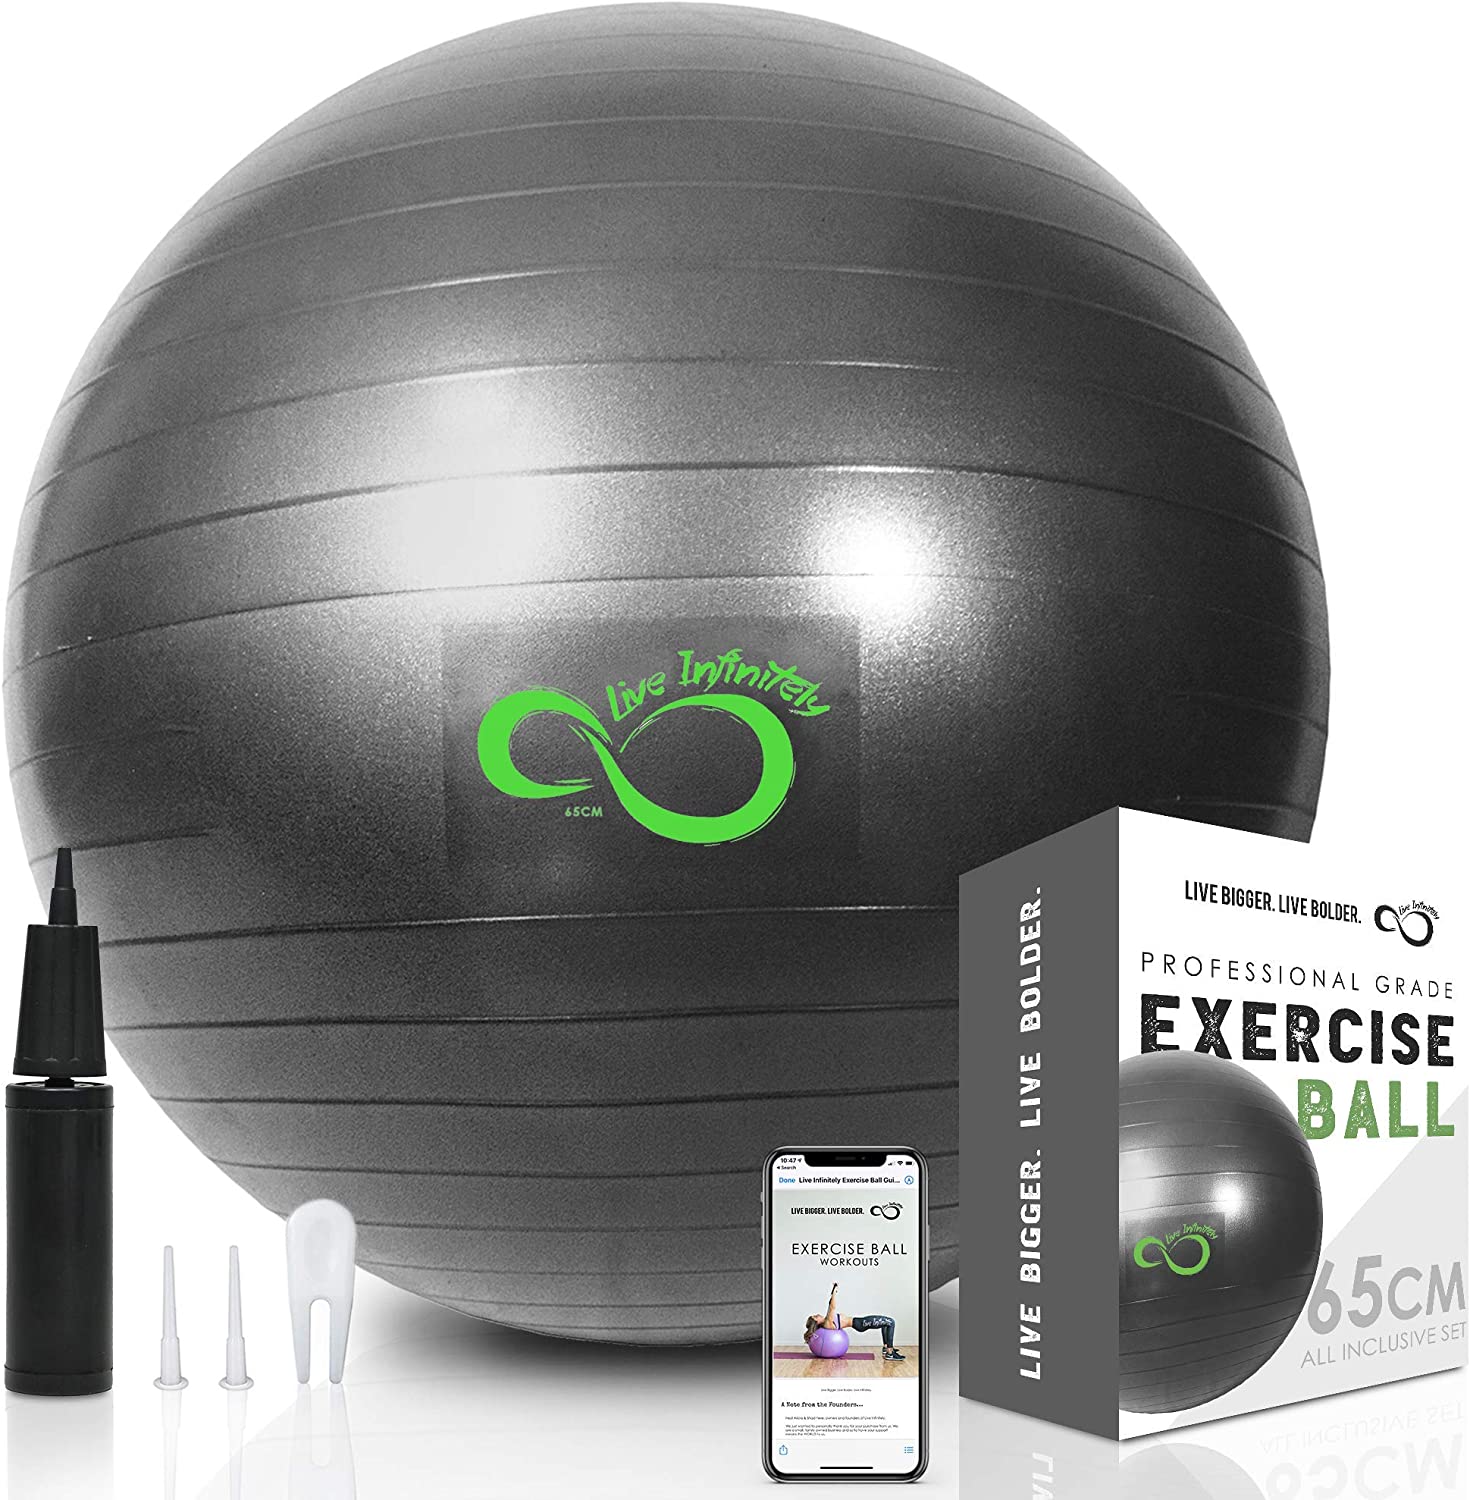 The 4 best exercise balls we tested